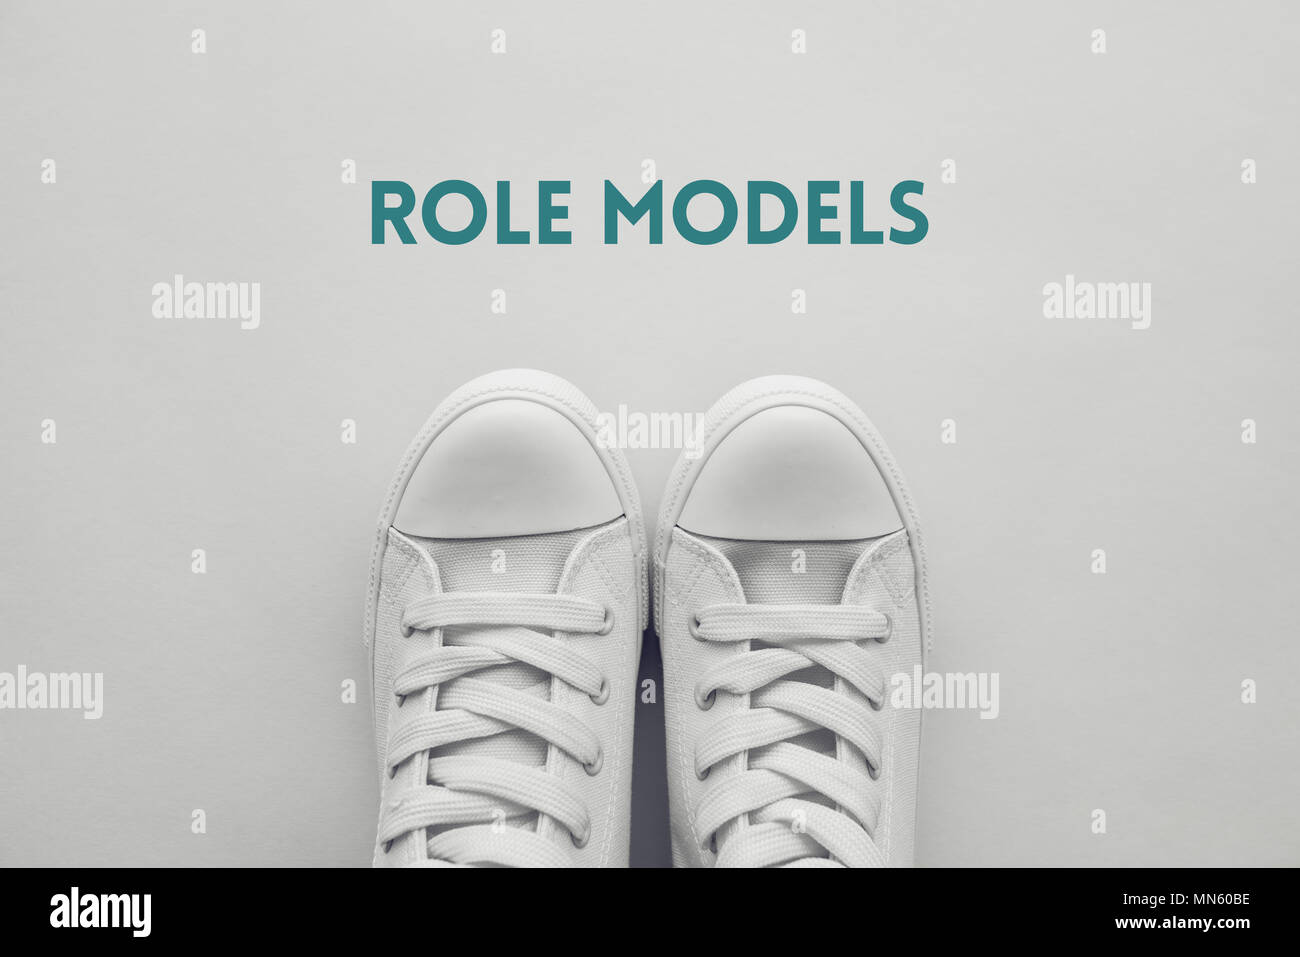 Role model for young people conceptual image with youth lifestyle type sneakers from above Stock Photo